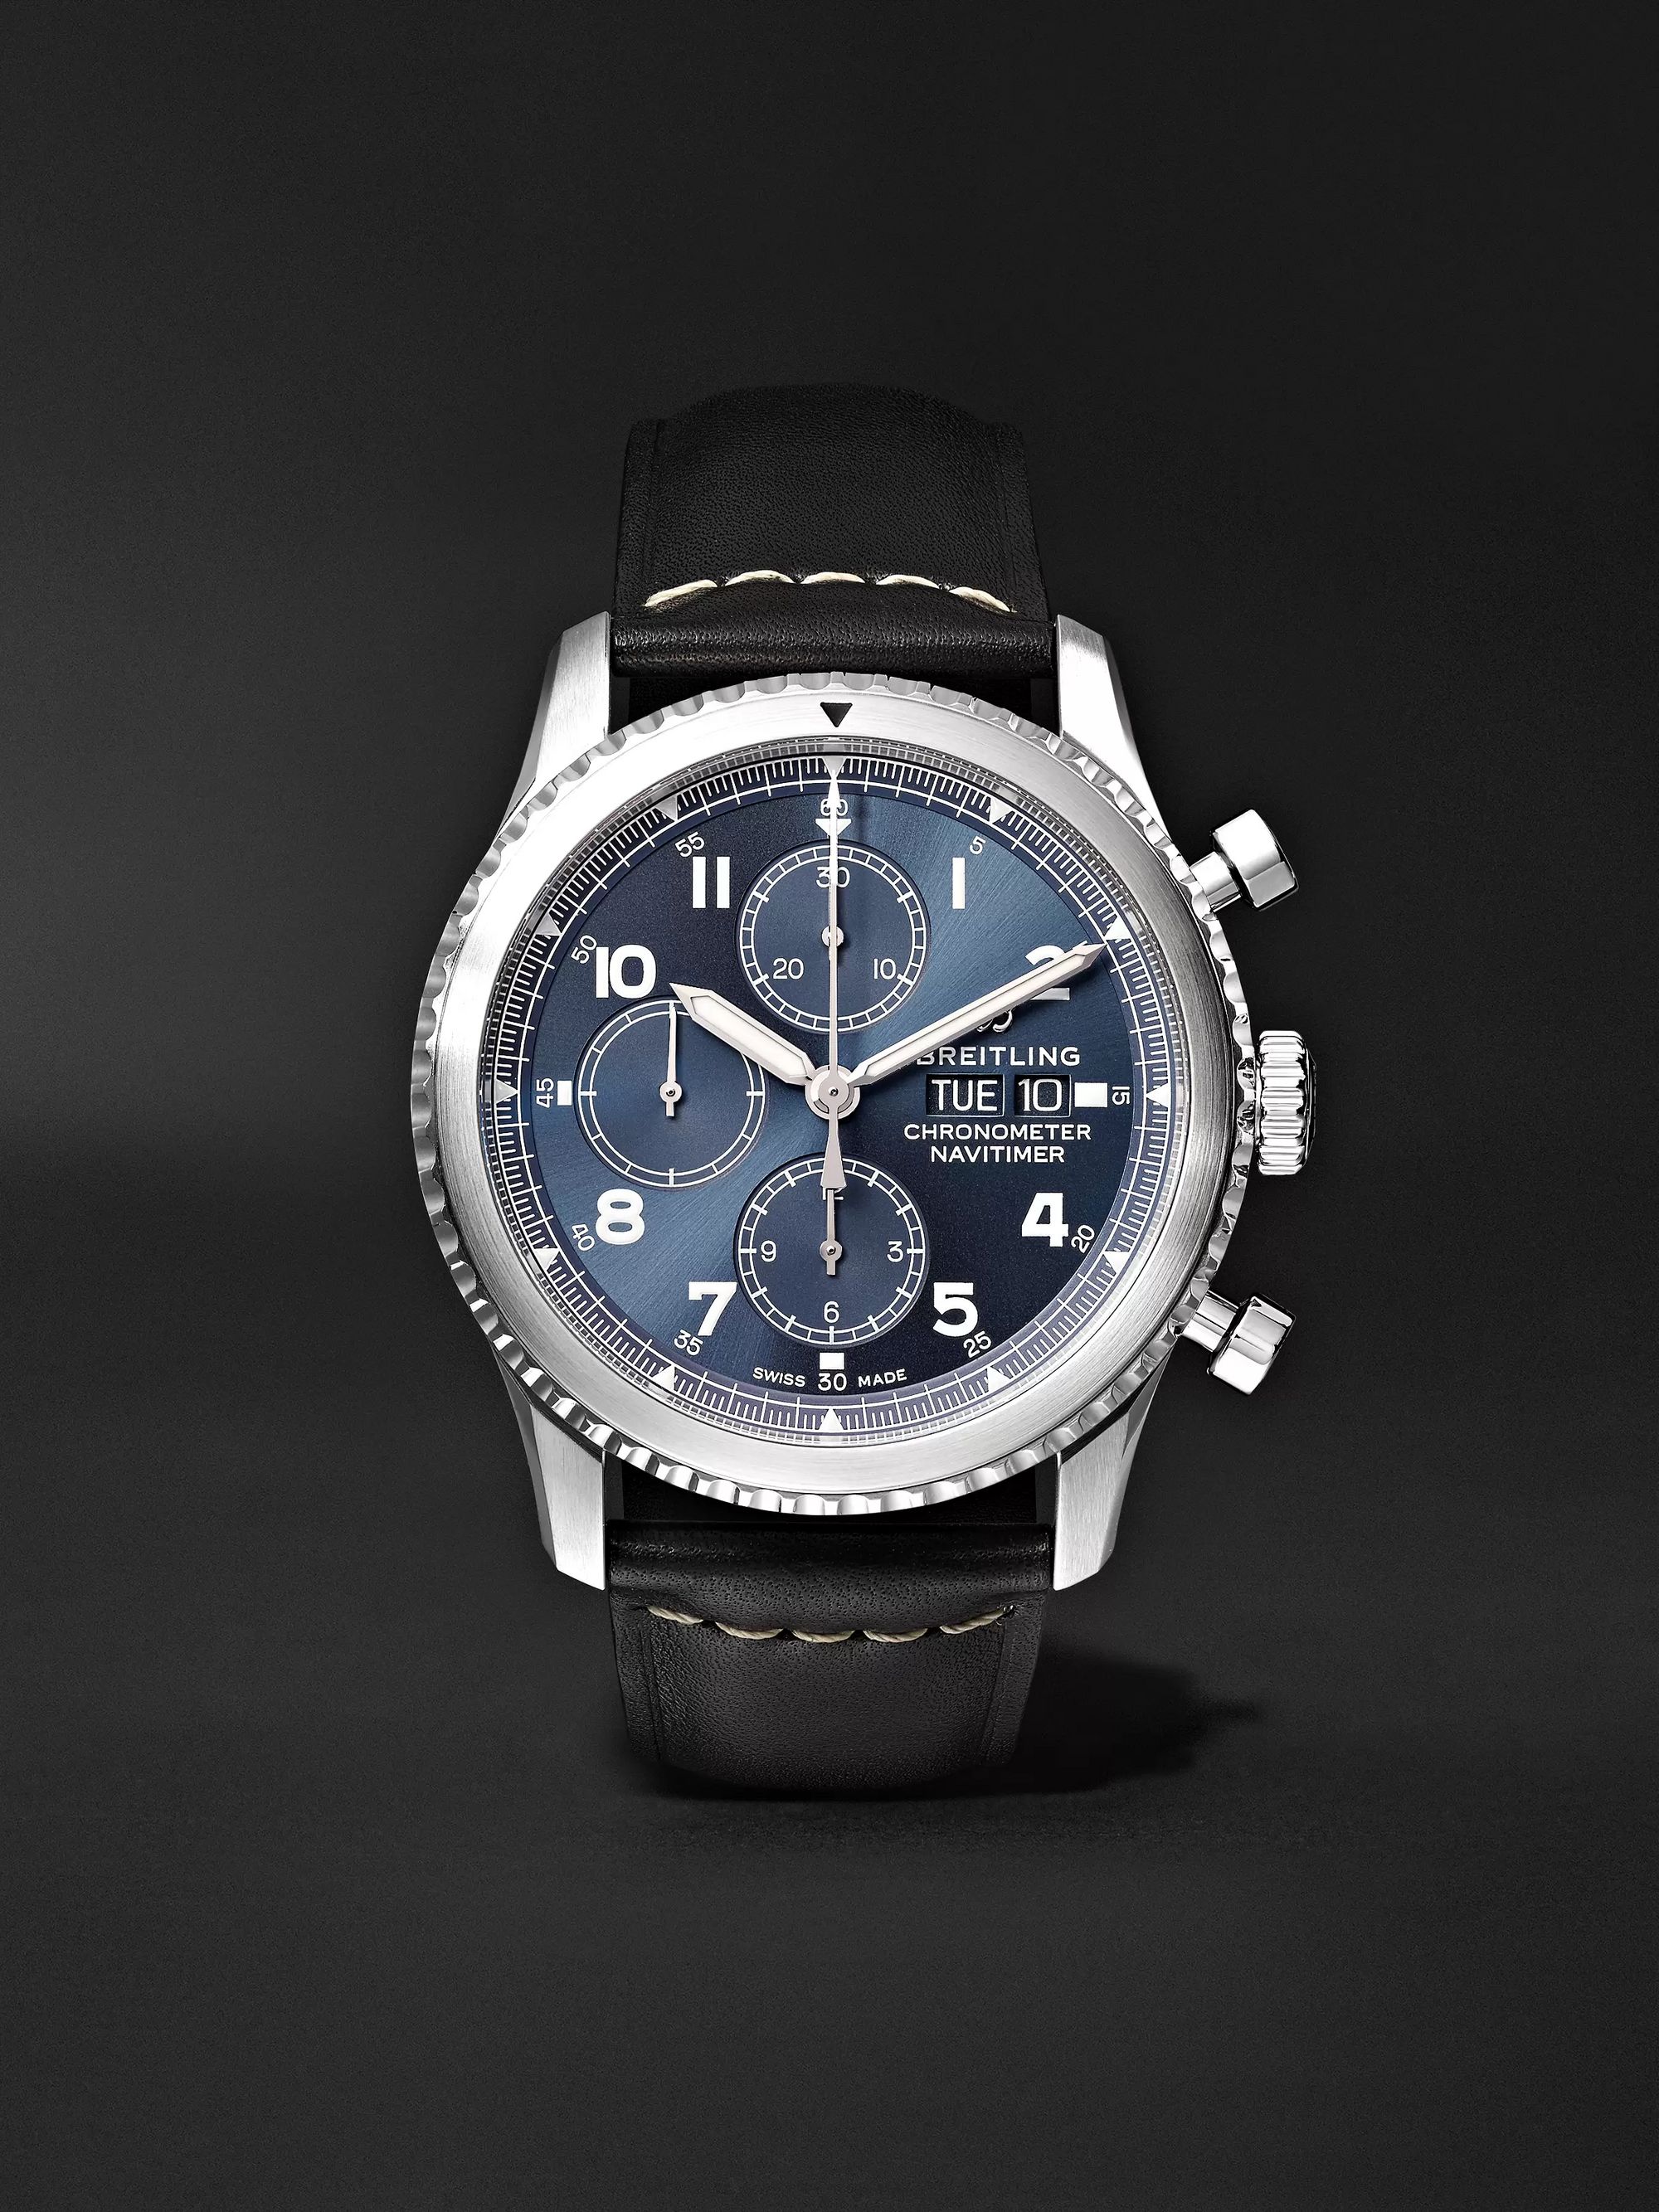 BREITLING Navitimer 8 Automatic Chronograph 43mm Steel and Leather Watch, Ref. No. A13314101C1X1